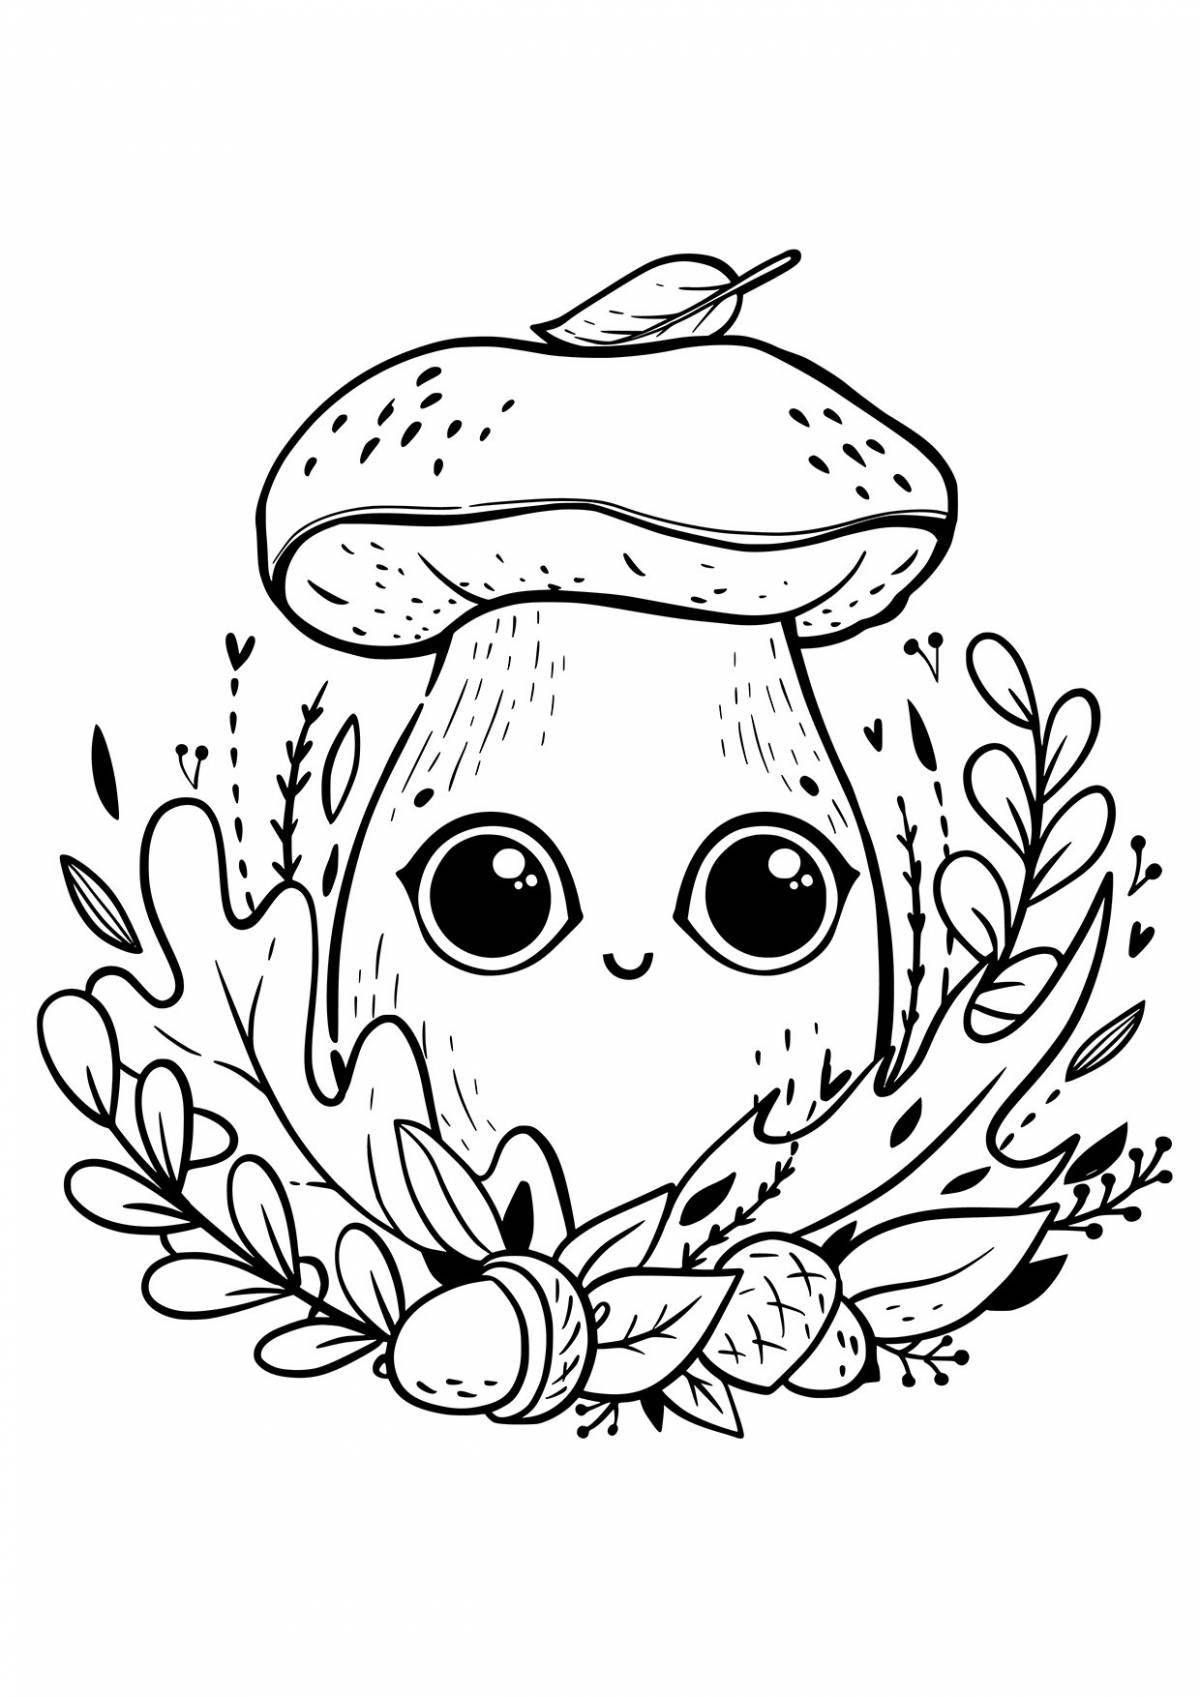 Silly cute frog coloring book